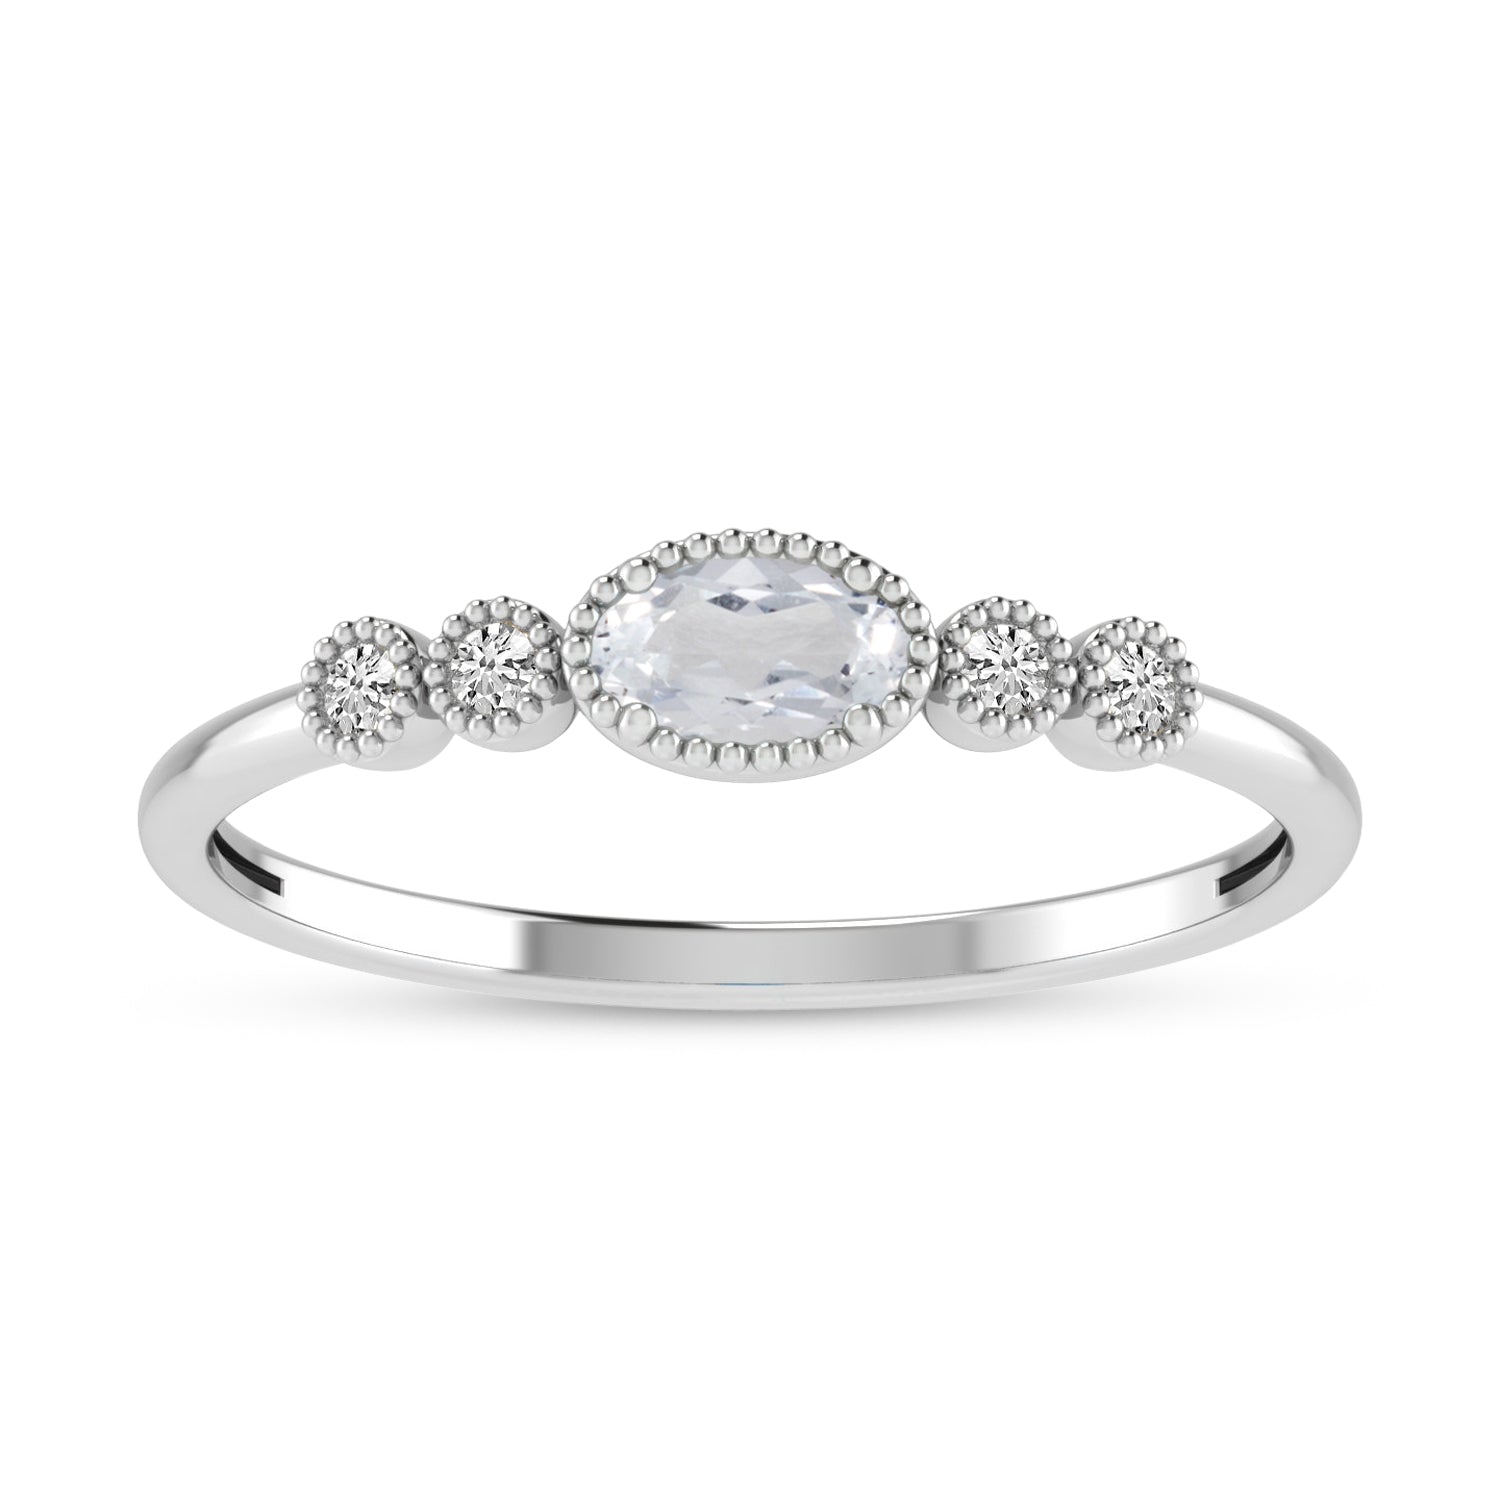 14K White Gold Oval White Topaz and Diamond Stackable Ring RM4307X-APR